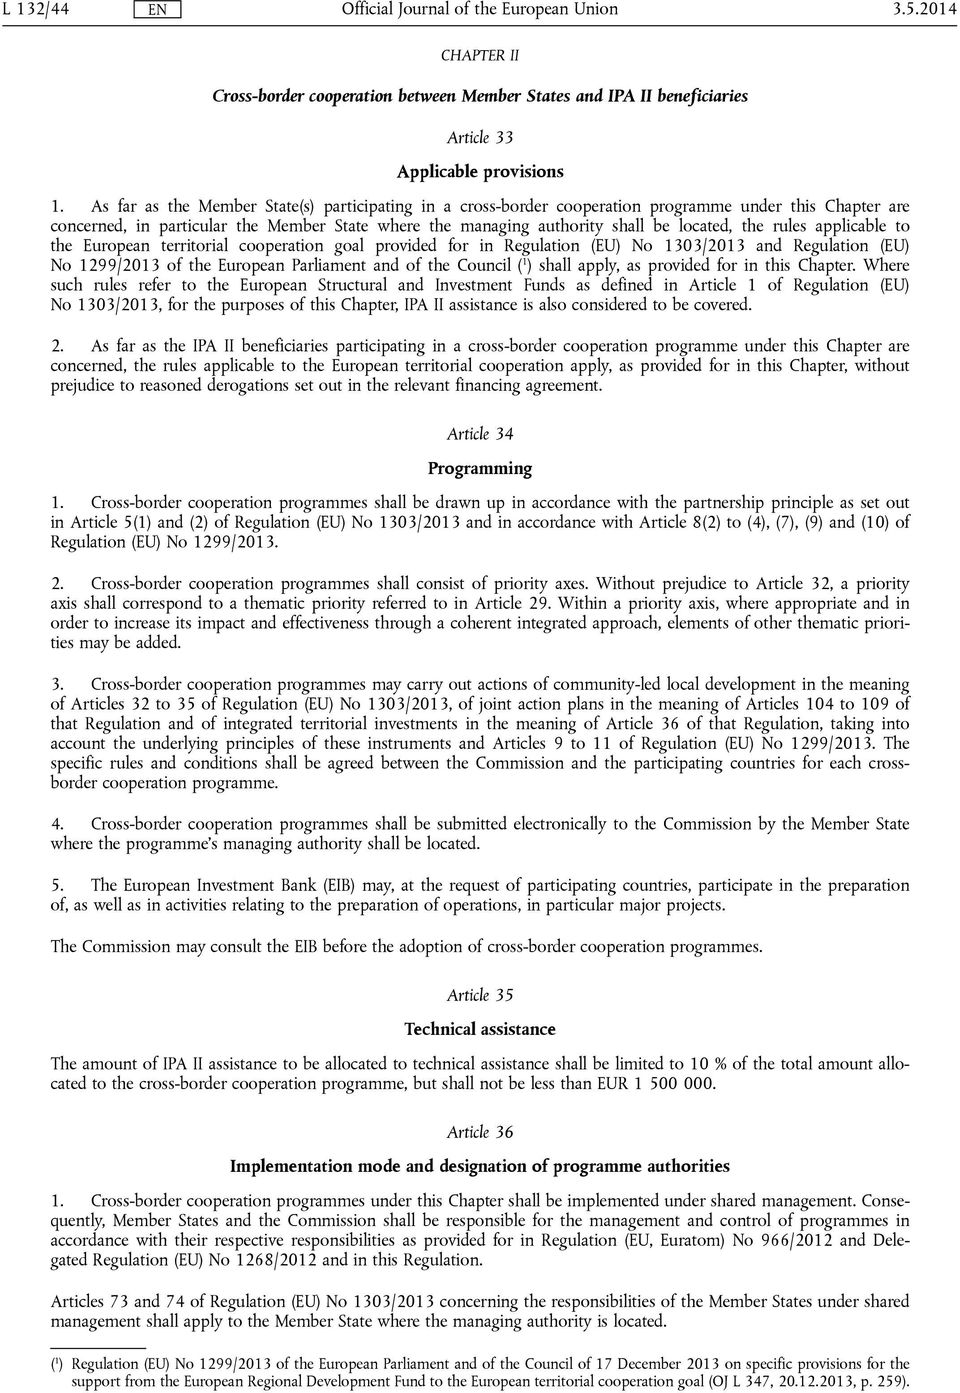 rules applicable to the European territorial cooperation goal provided for in Regulation (EU) No 1303/2013 and Regulation (EU) No 1299/2013 of the European Parliament and of the Council ( 1 ) shall